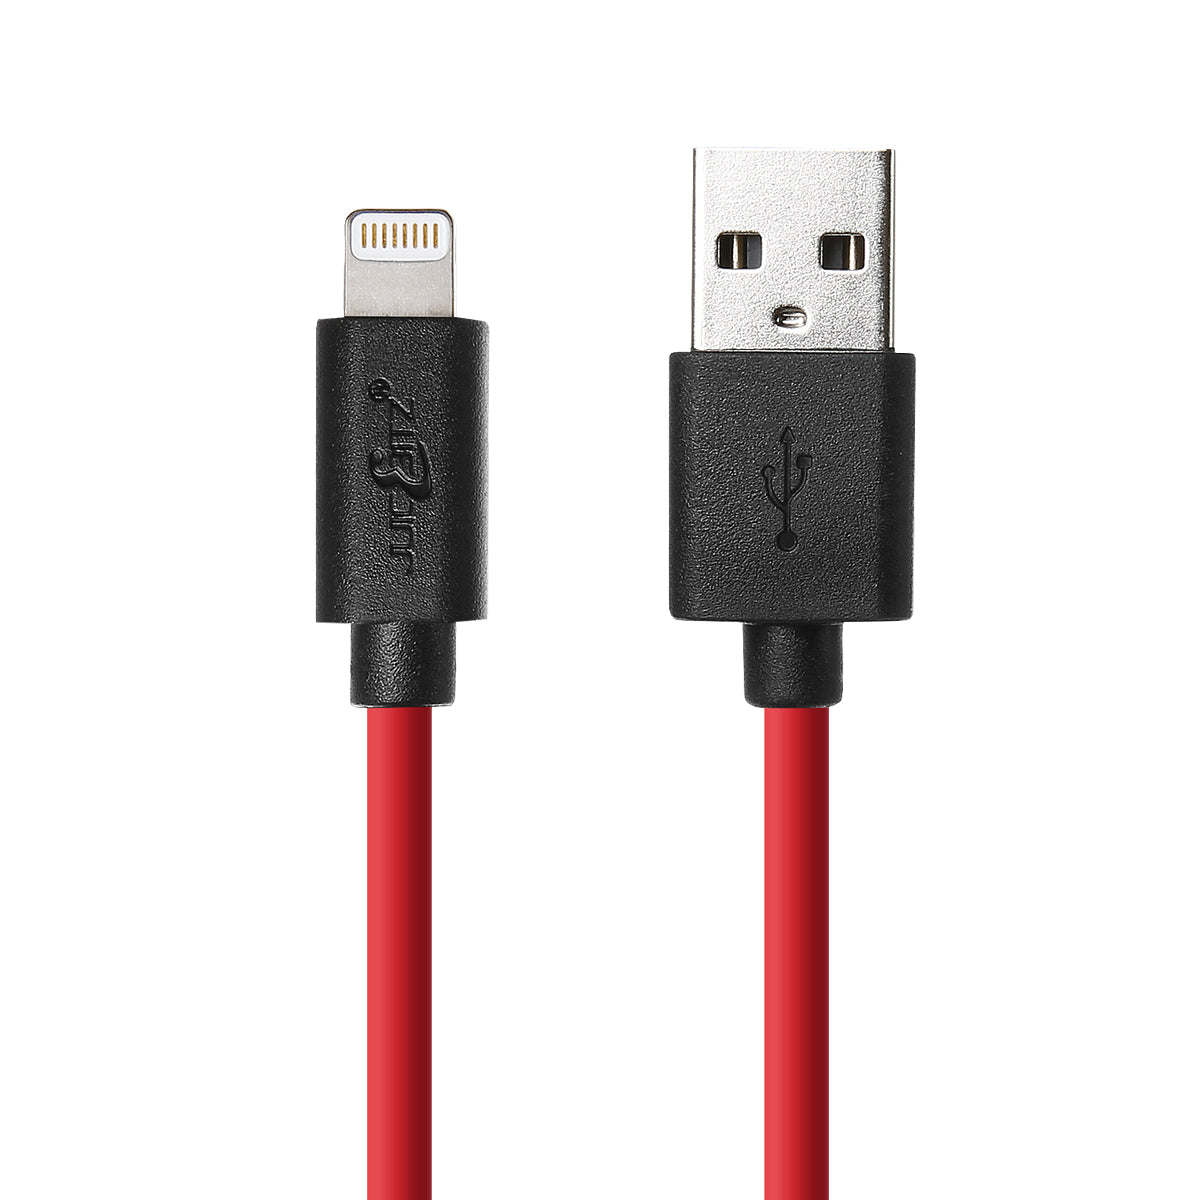 USB Charger Cable Data Sync Lead for iPhone, iPad, iPod - Red